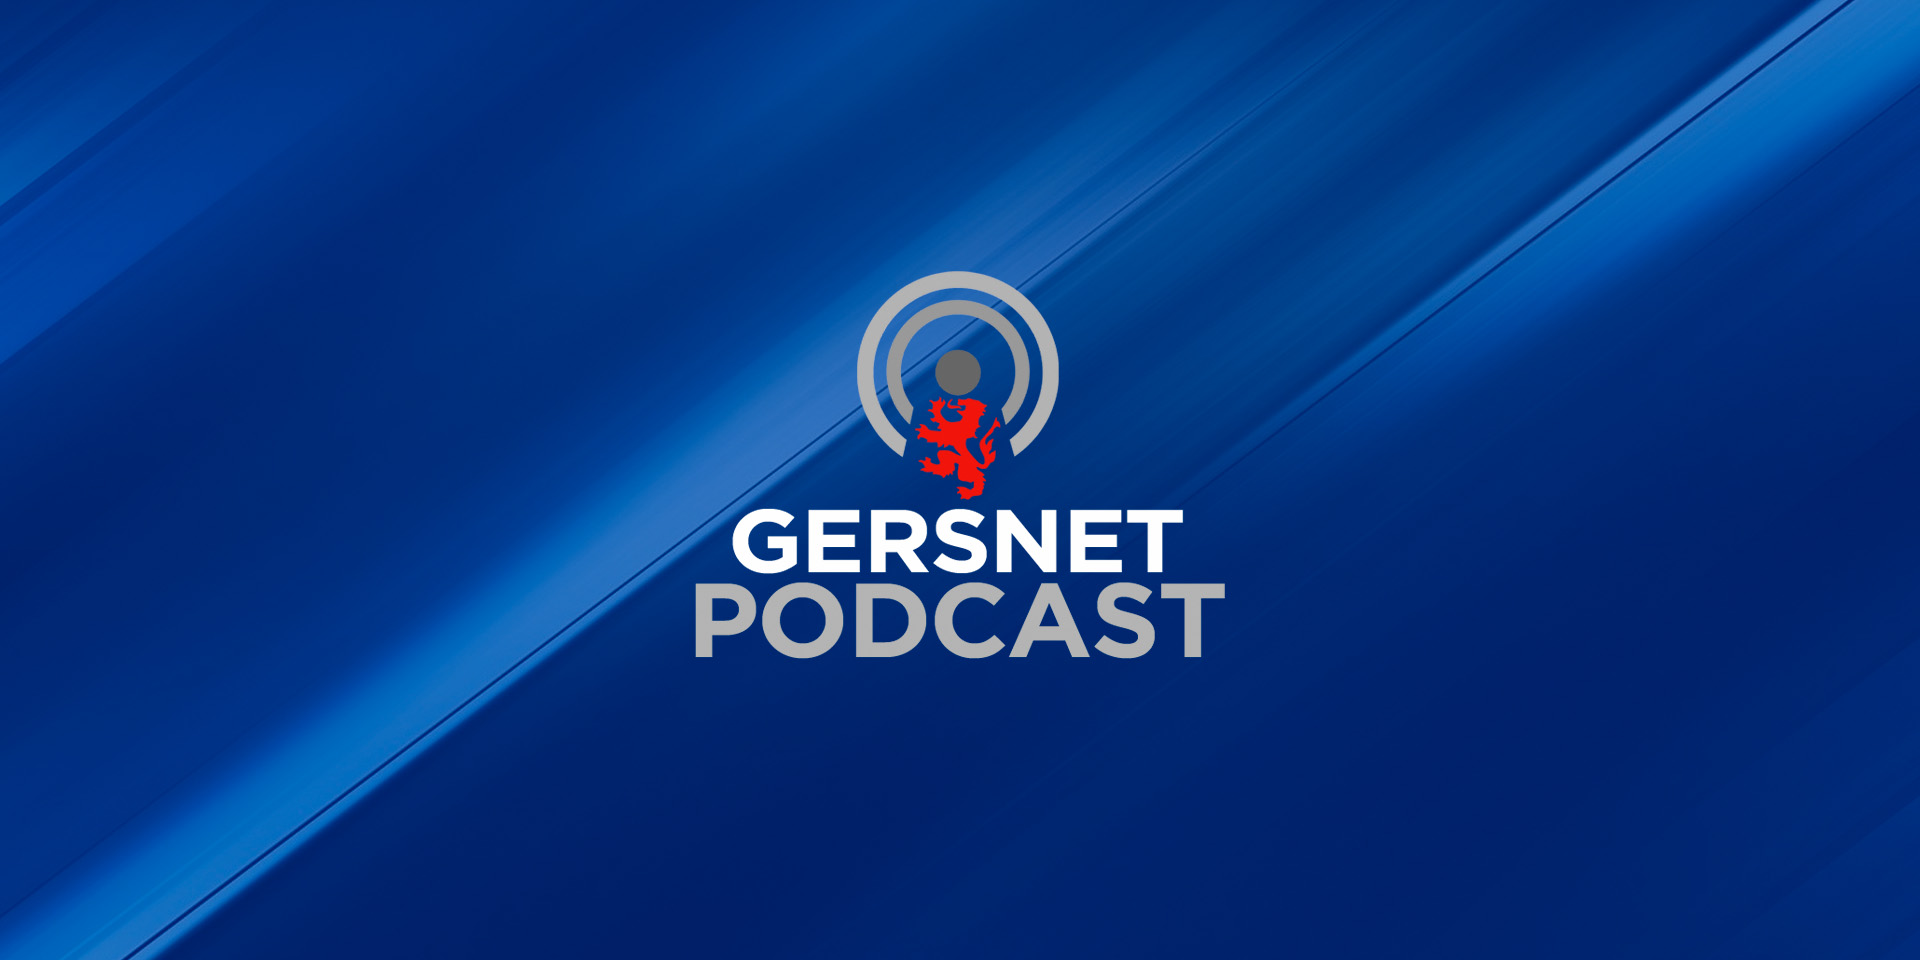 Gersnet Podcast 262 - Scottish Cup Preview